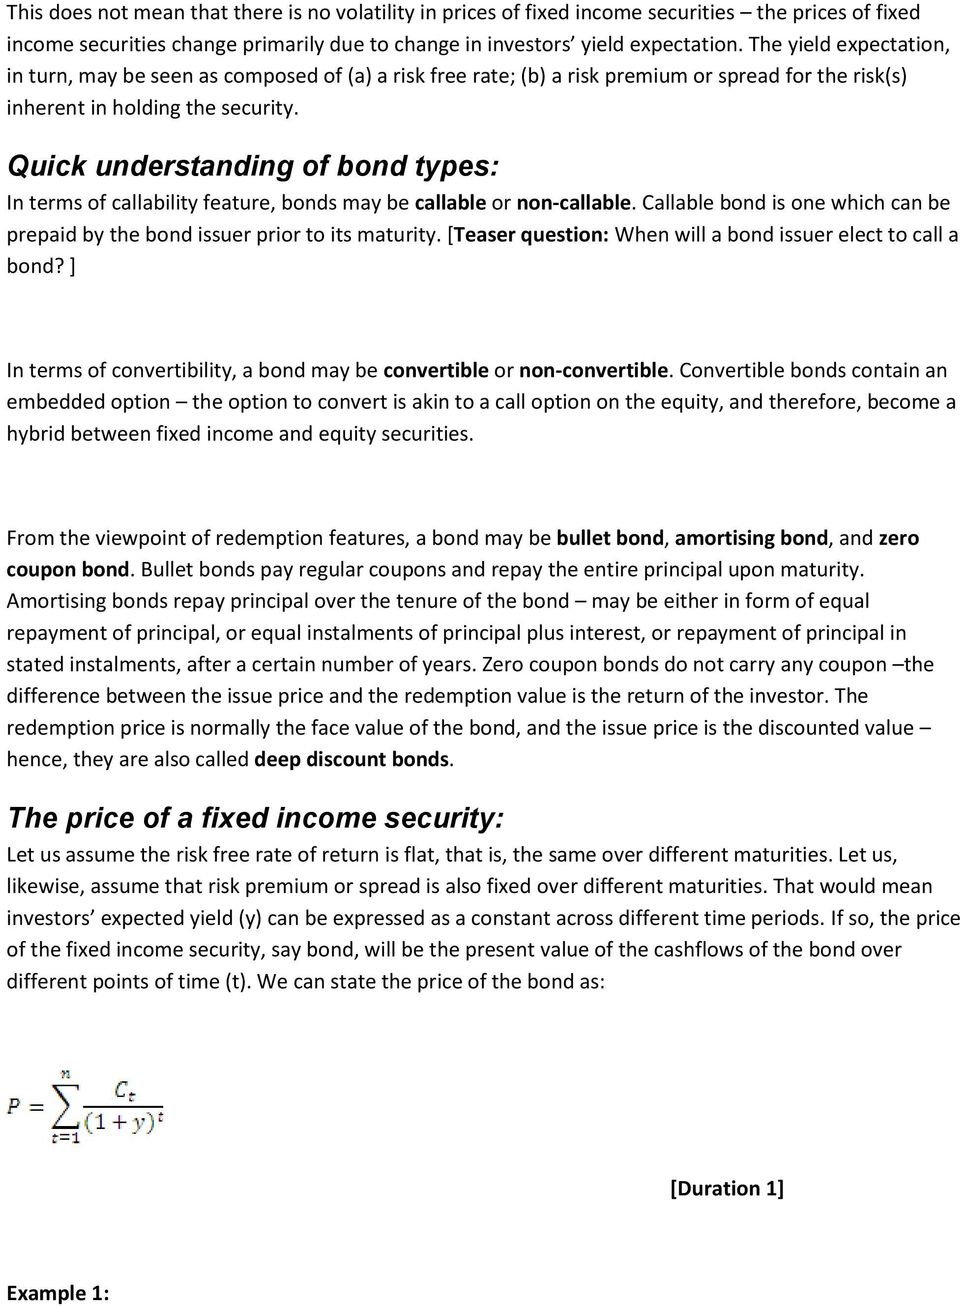 Quick understanding of bond types: In terms of callability feature, bonds may be callable or non-callable. Callable bond is one which can be prepaid by the bond issuer prior to its maturity.